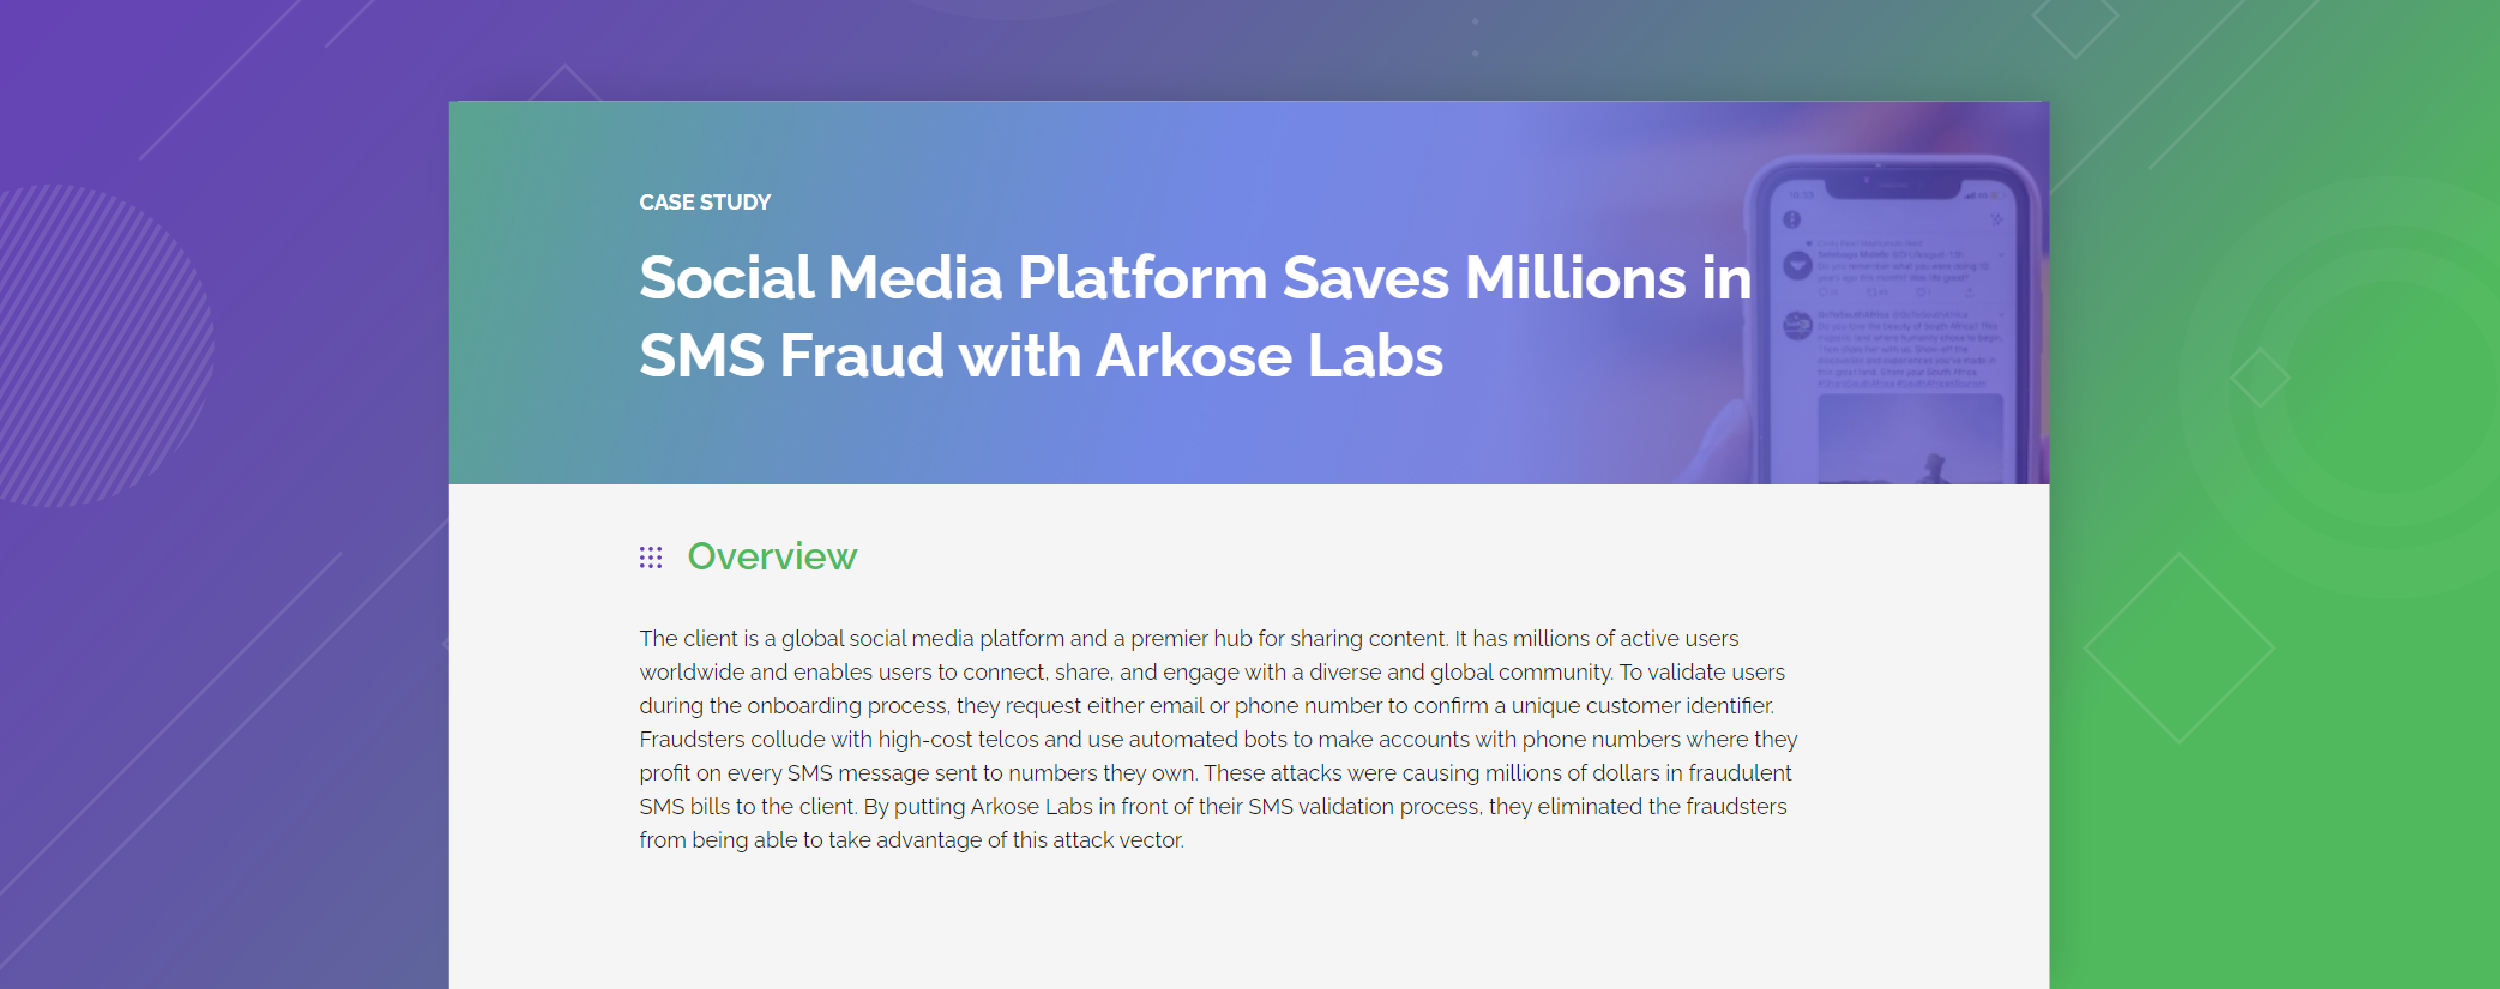 Social Media Platform Saves Millions in SMS Fraud with Arkose Labs